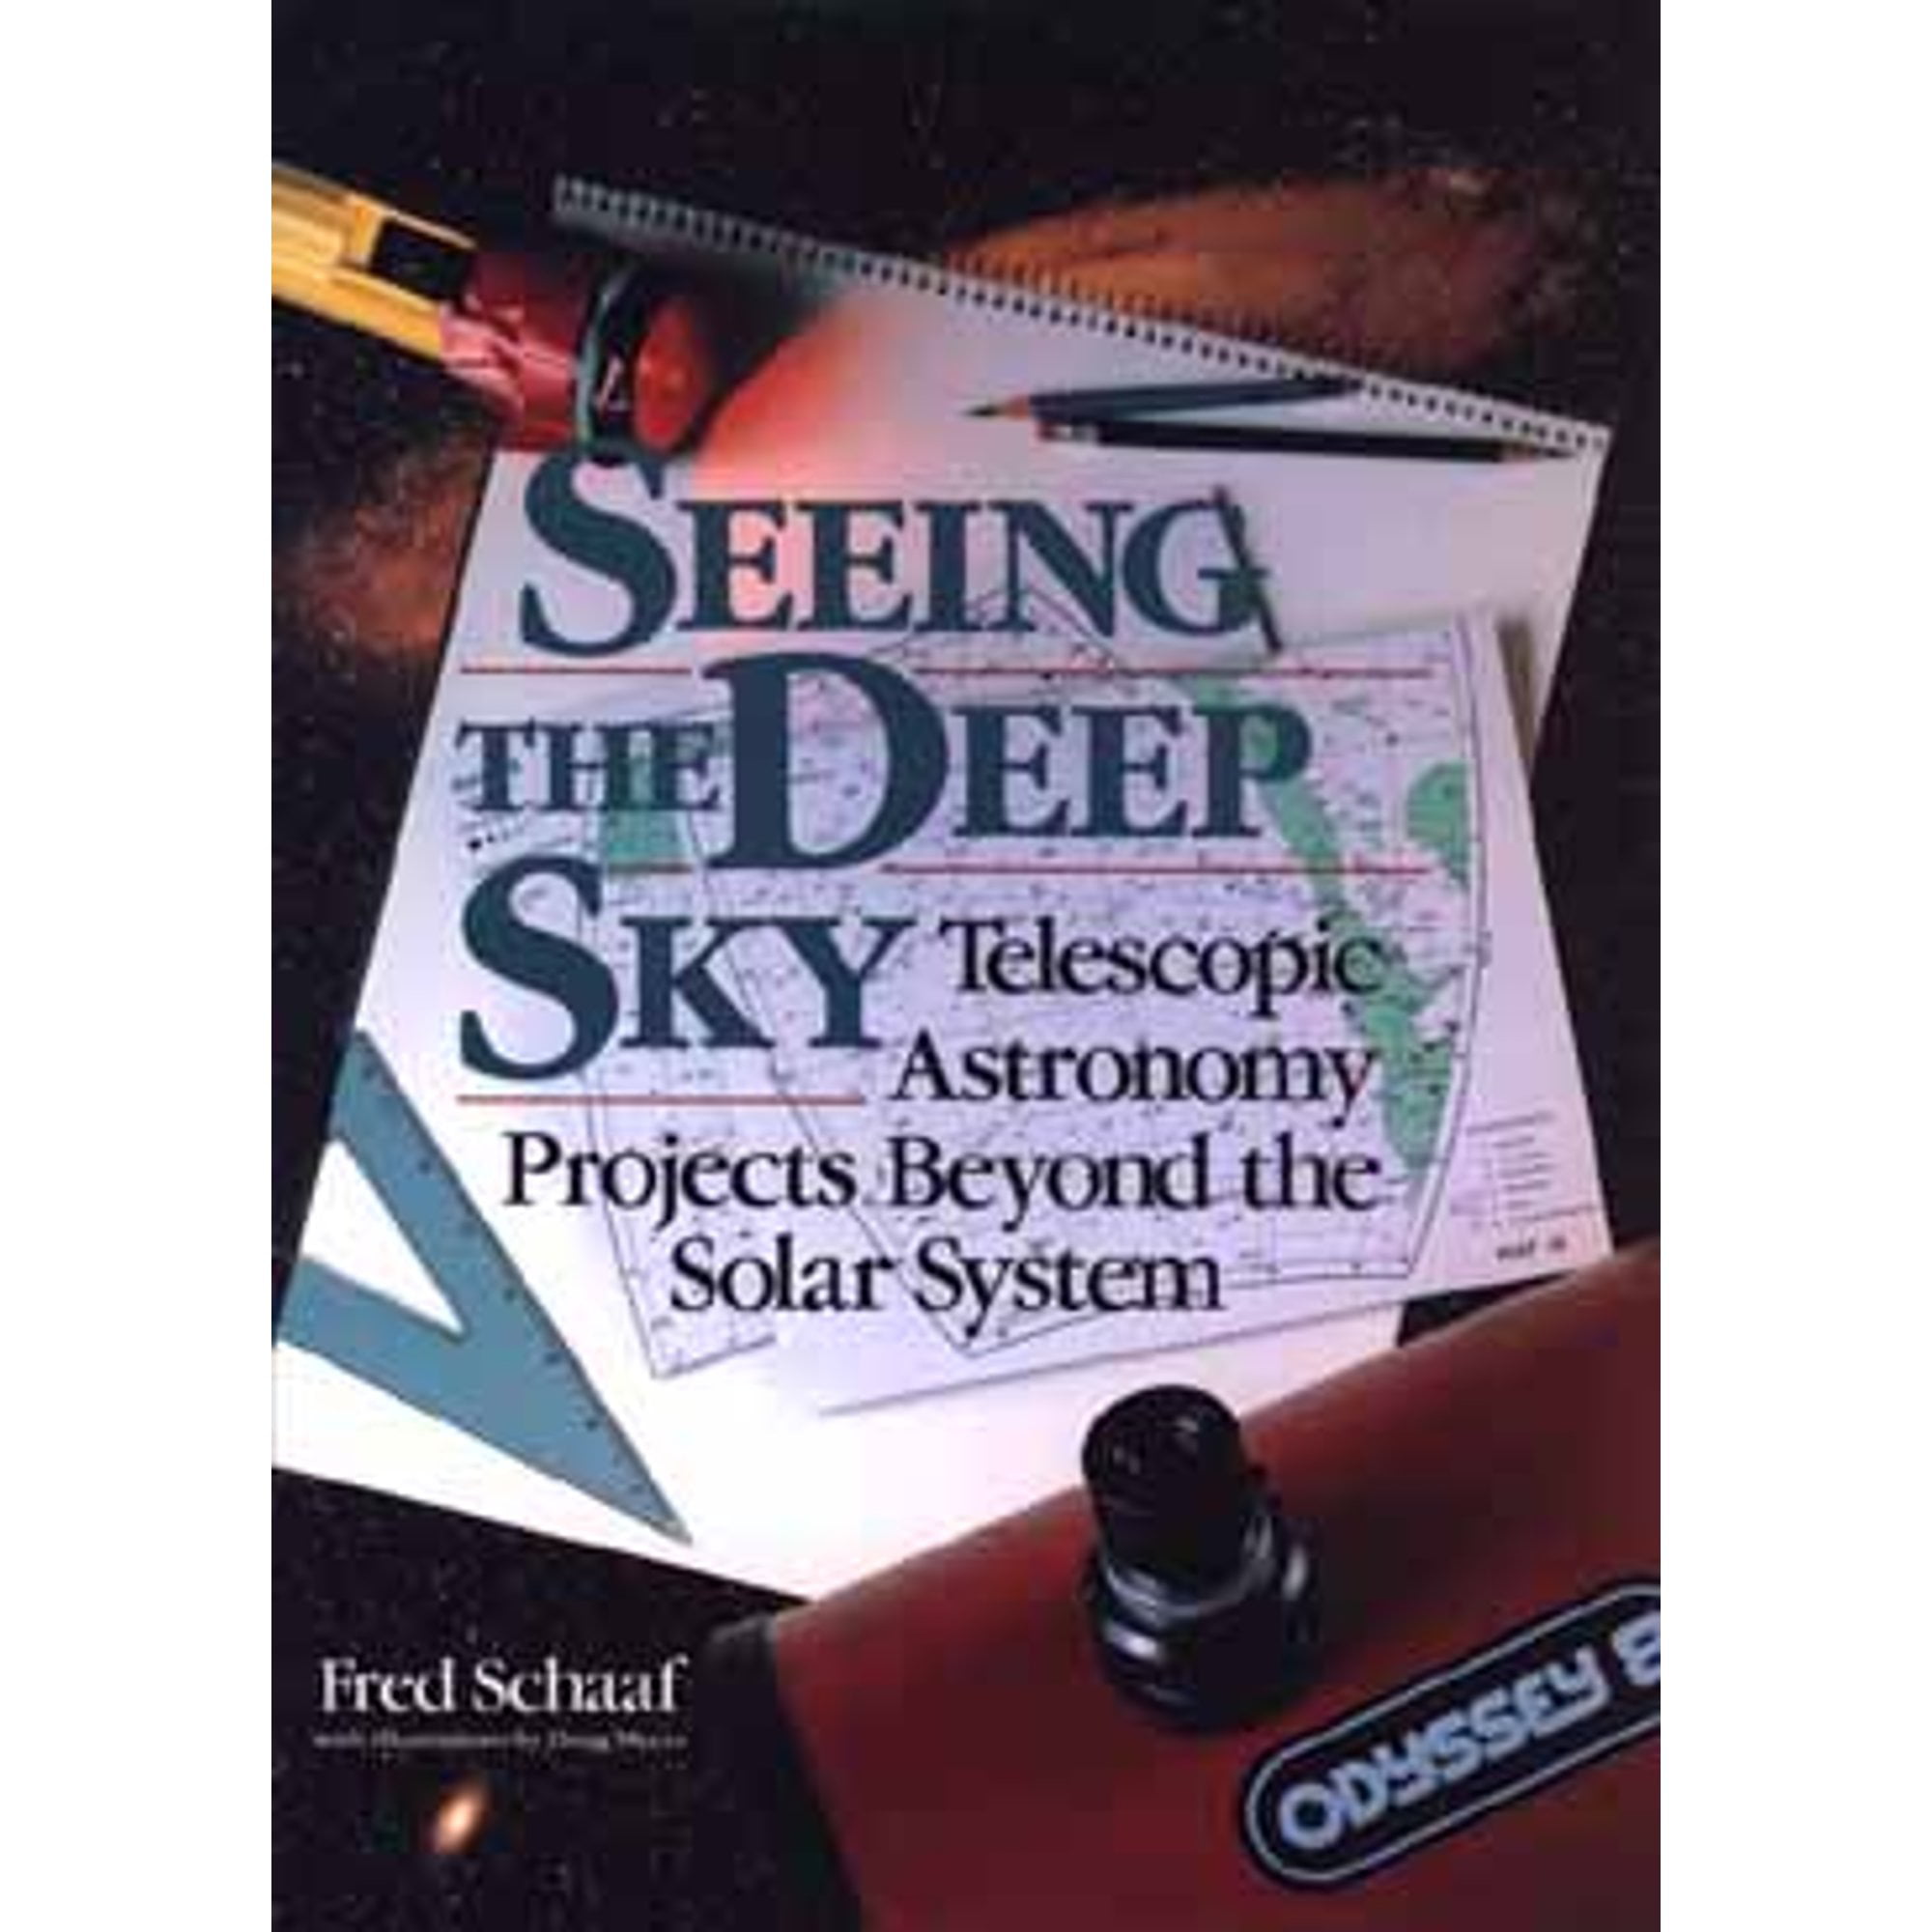 Seeing the Deep Sky Telescopic Astronomy Projects Beyond the Solar System (Pre-Owned Hardcover 9780471530688) by Fred Schaaf